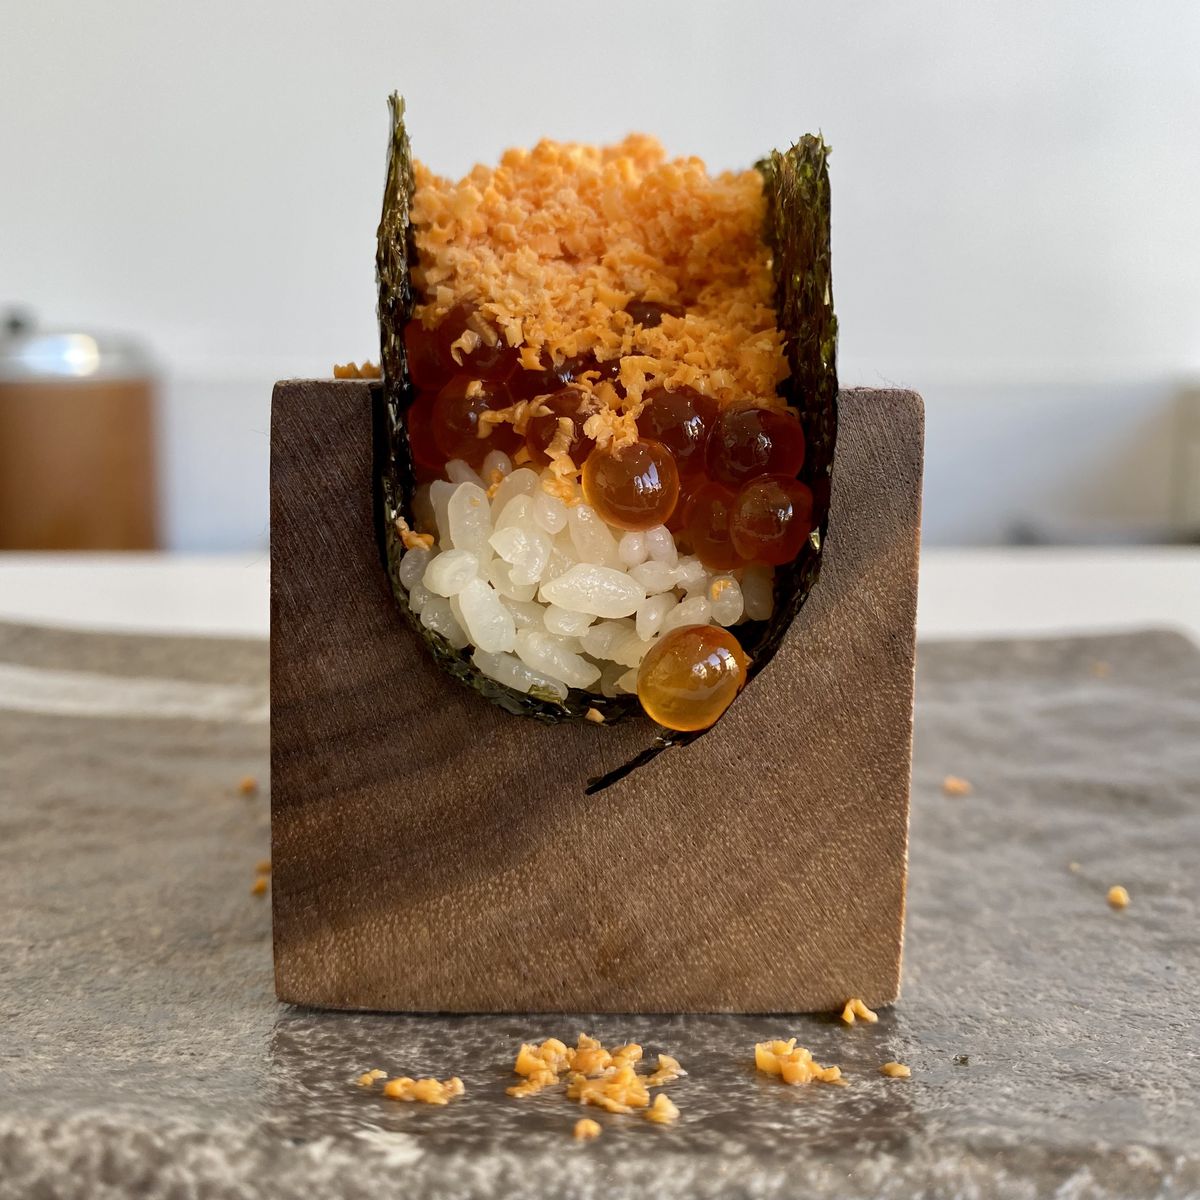 A handroll made with rice, ikura, and grated front monkfish liver held in a wooden U-shaped stand on a counter.